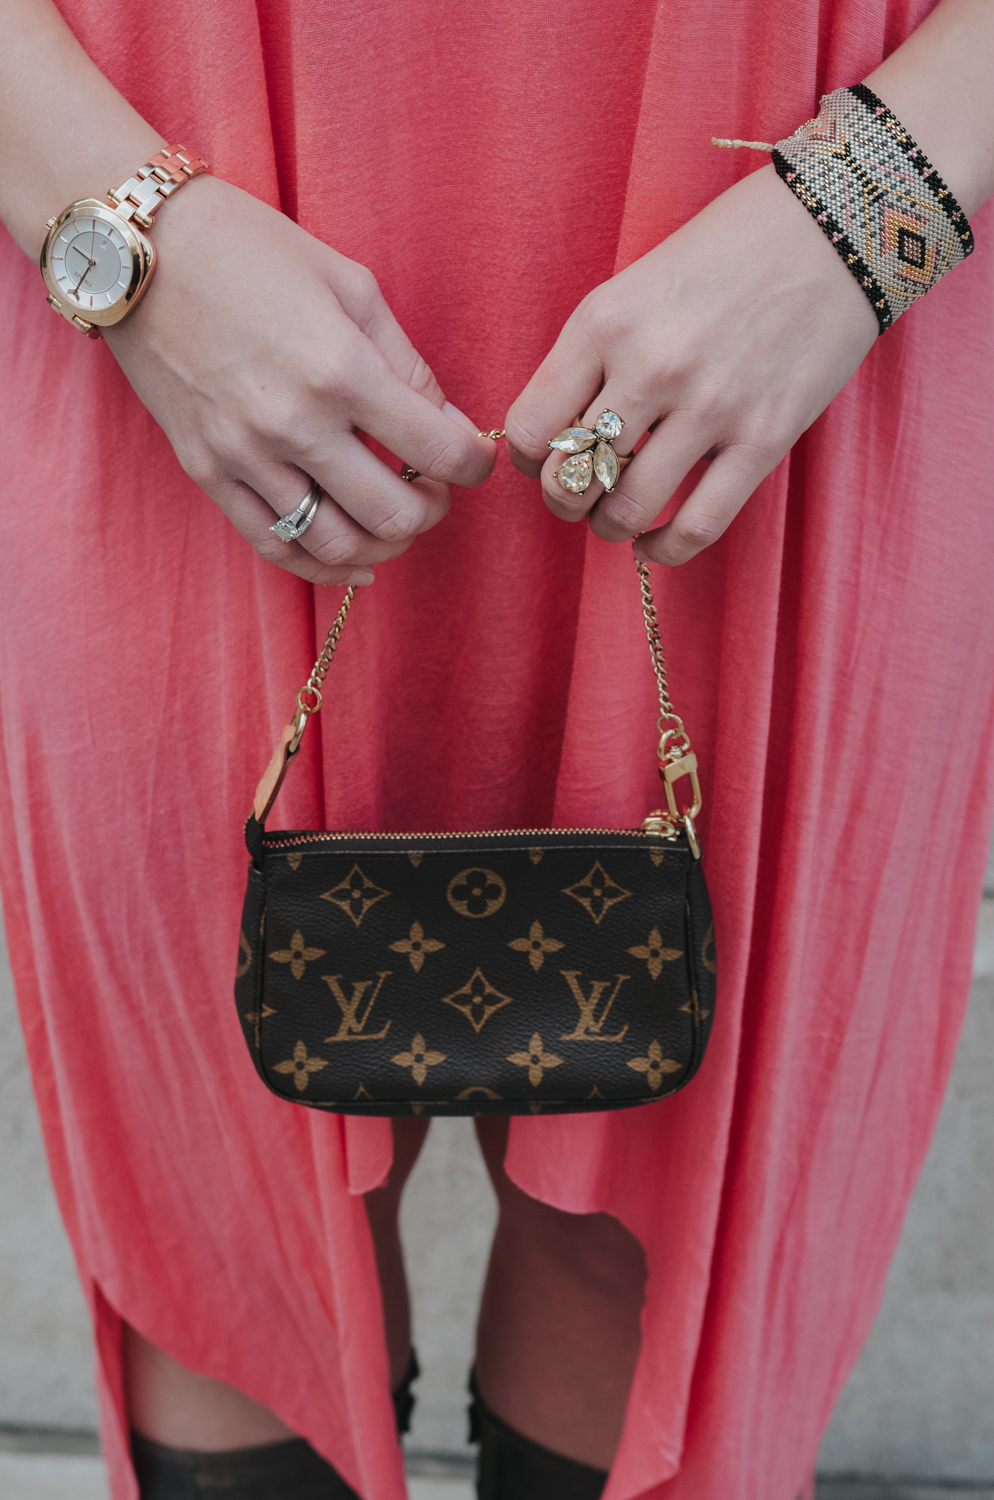 Accessories: Louis Vuitton Pochette Accessoire cloth handbag, Cocktail Ring from @7charmingsister, Wing Ding Cuff Bracelet from @KutulaKiss, Coachella Rose Tone Watch from @EscapeWatches